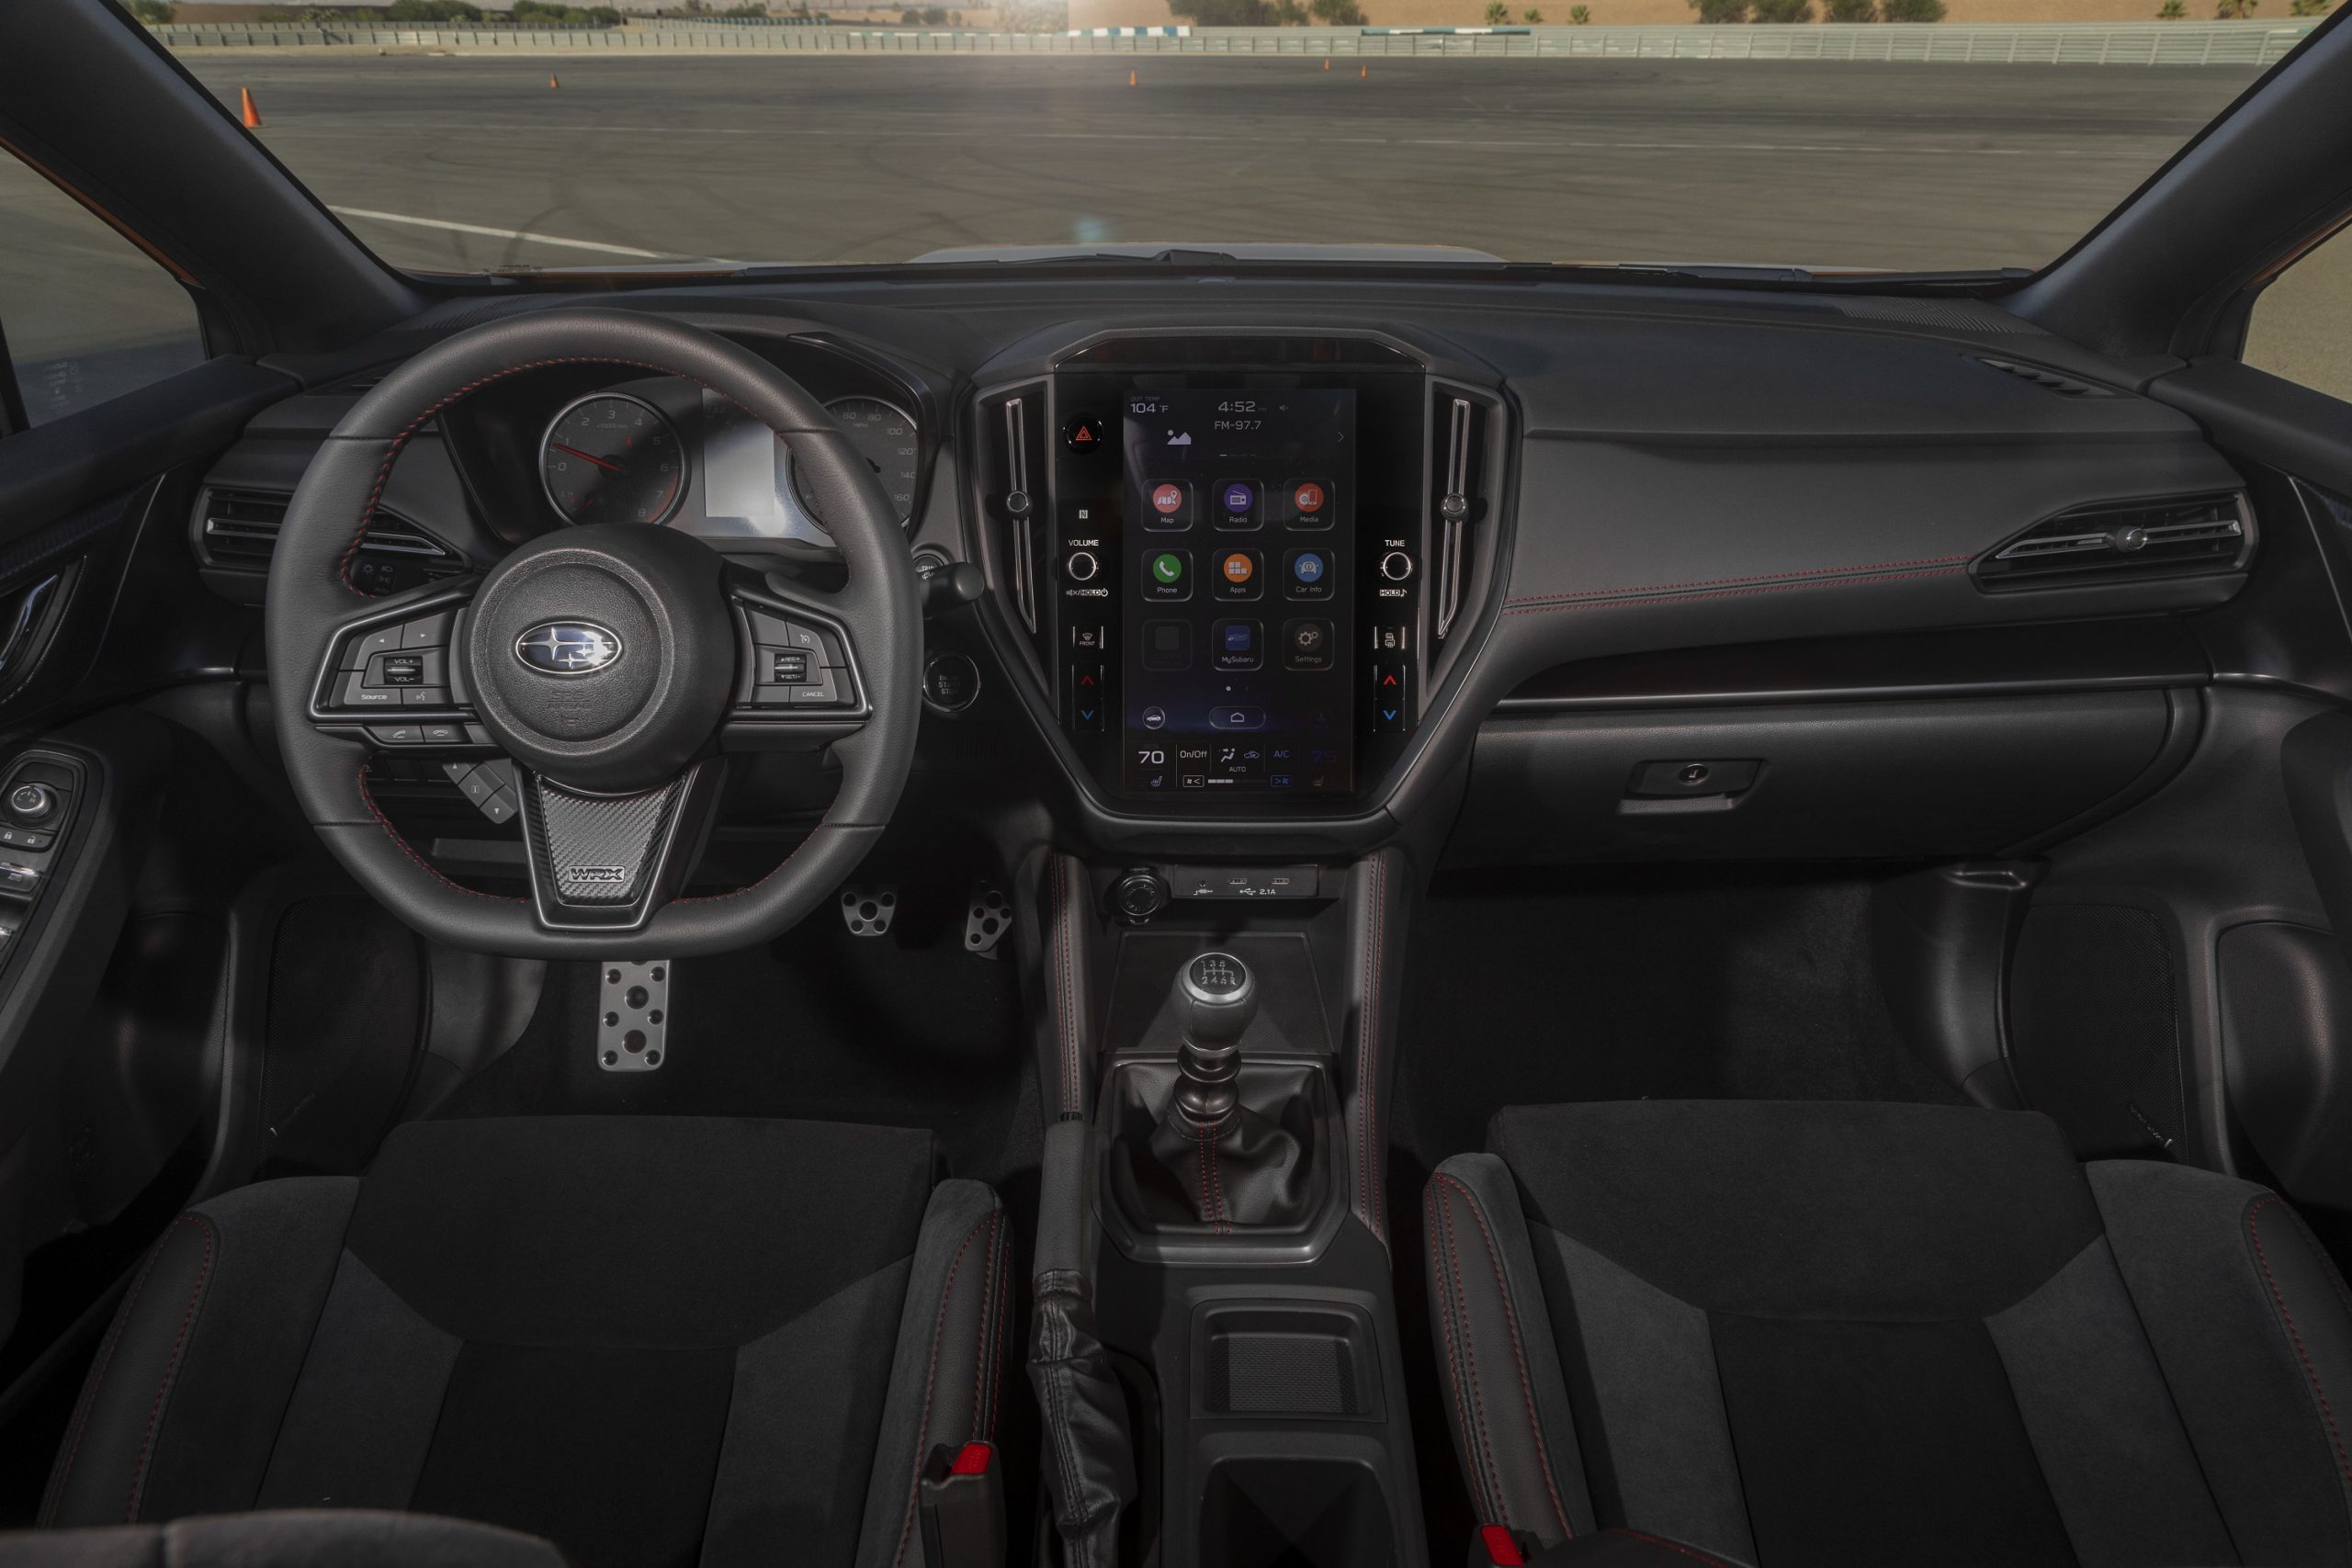 The black interior of the 2022 Subaru WRX with manual transmission, shot from the center rear seat